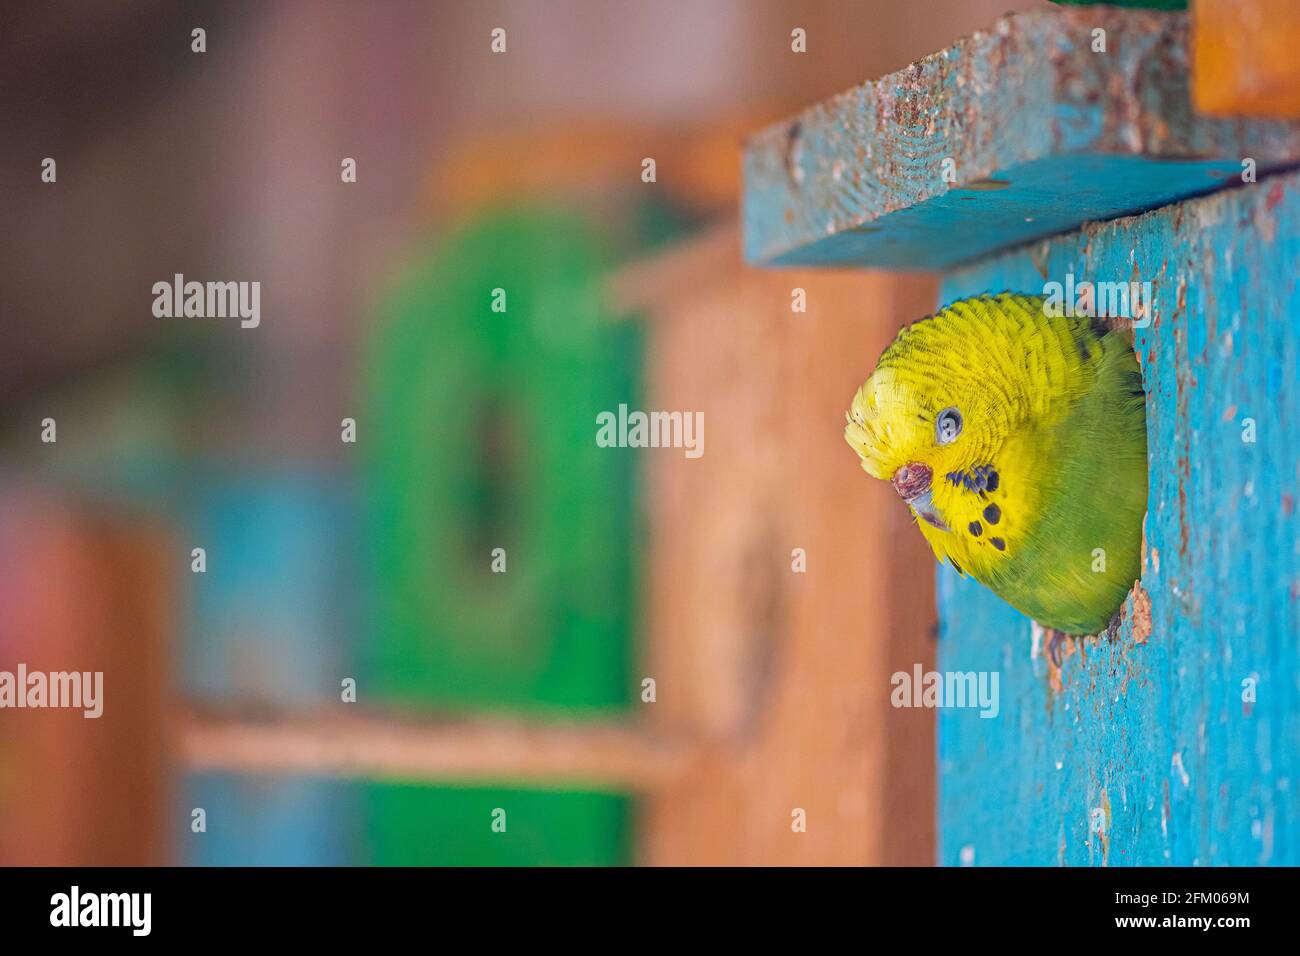 Tiny Budgie parrot face or Parakeet outside the door or entrance of a colorful wooden house Stock Photo